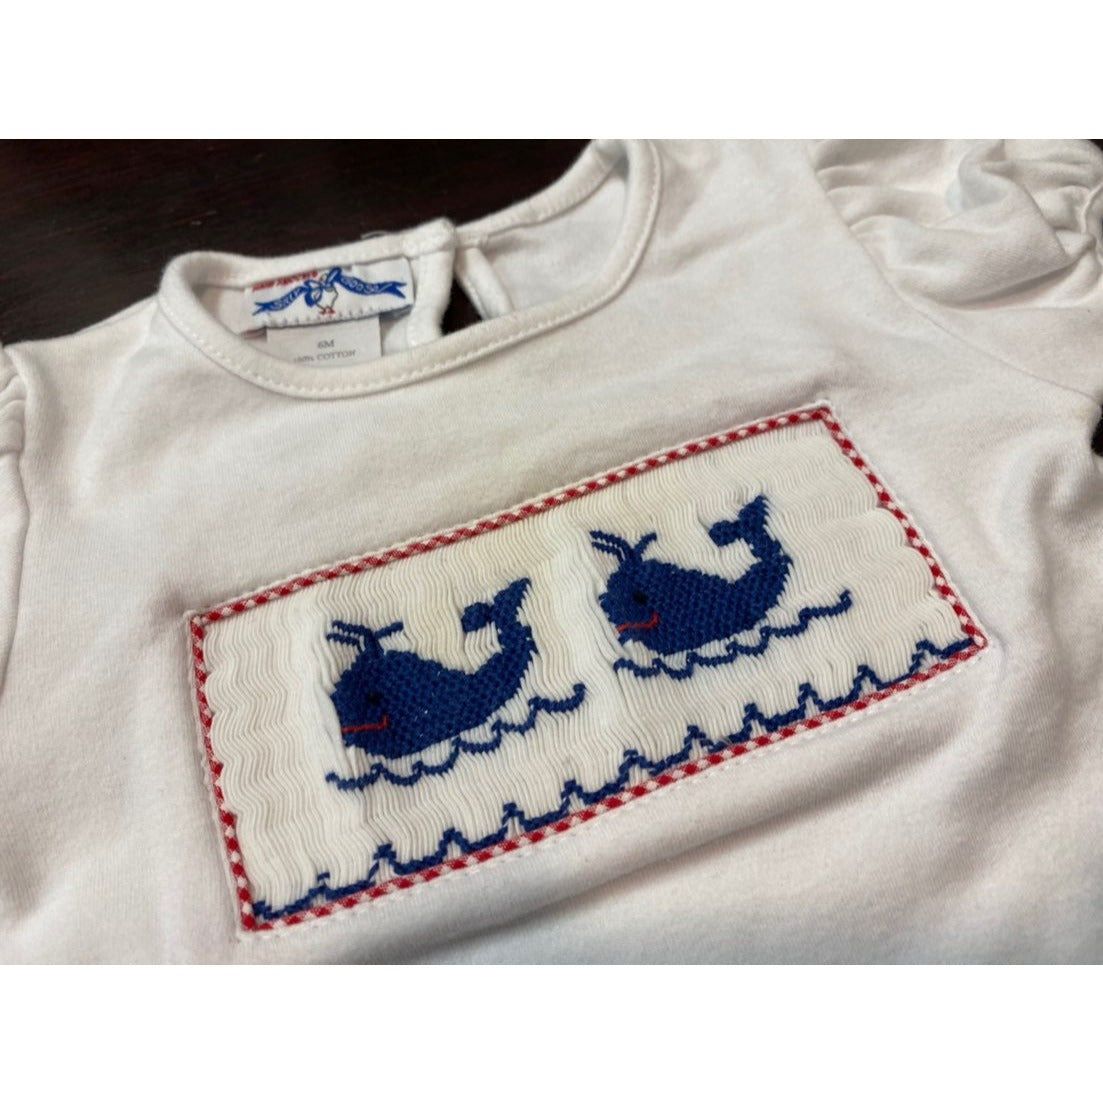 6 months smocked whale ruffle top